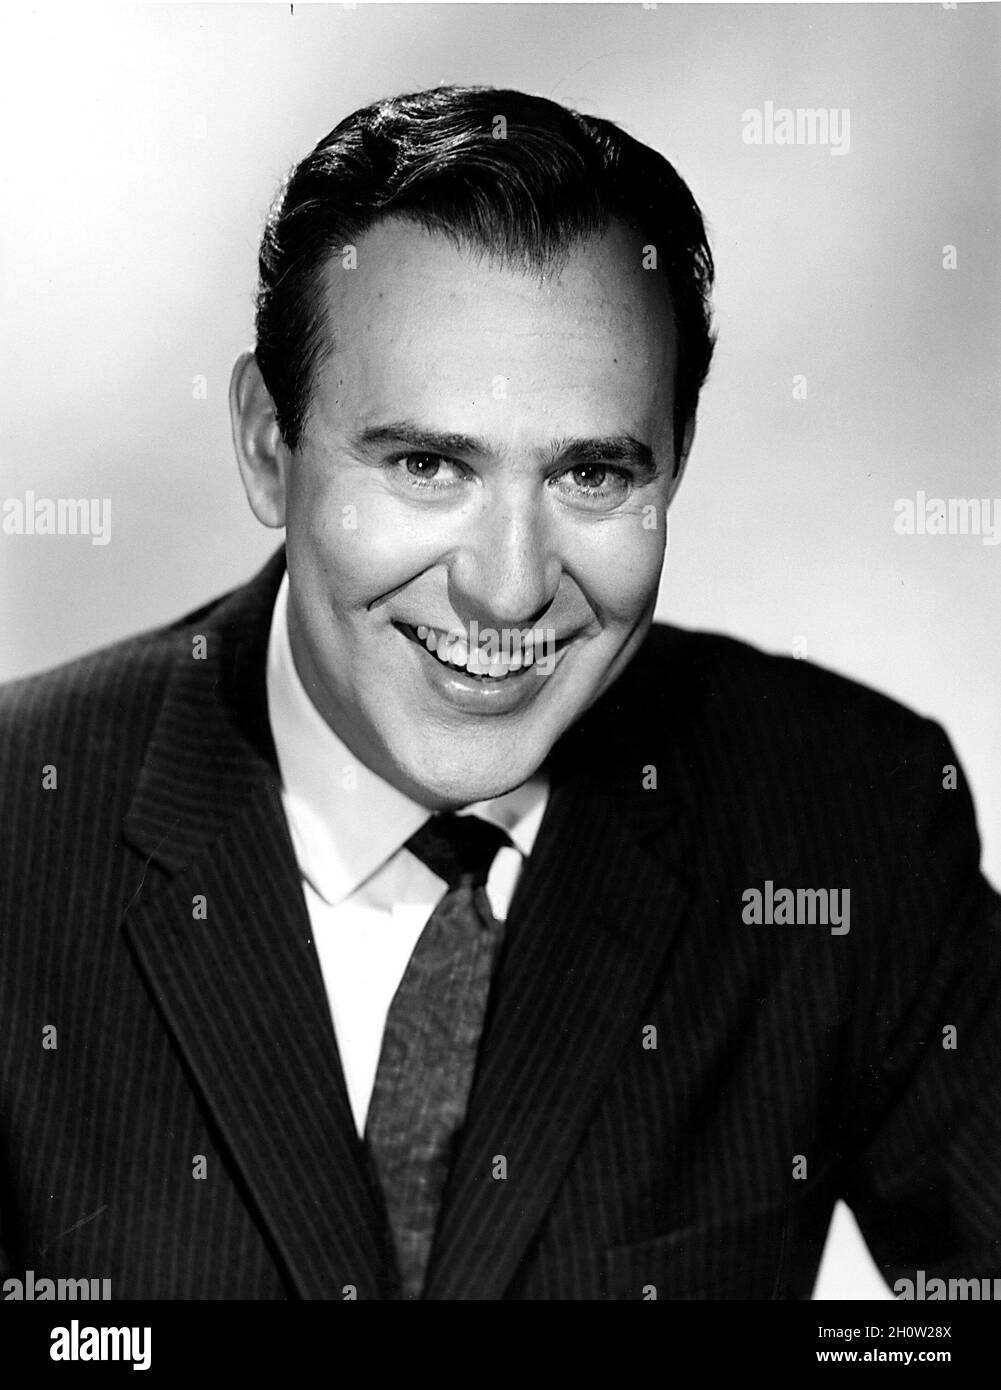 Carl reiner Black and White Stock Photos & Images - Alamy